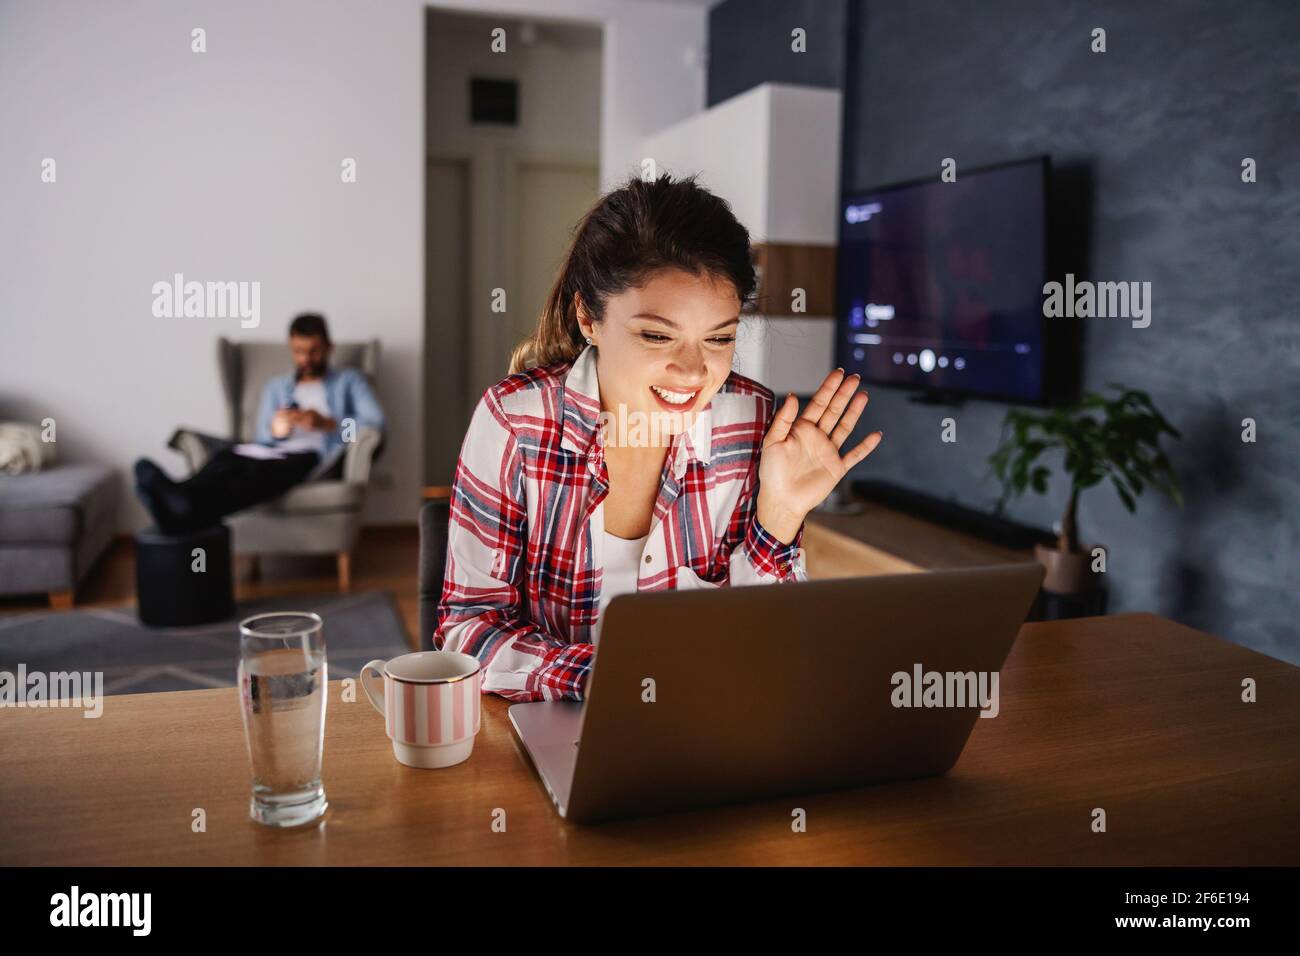 Smiling happy woman sitting at home during lockdown and having video call with her loved ones. Stock Photo